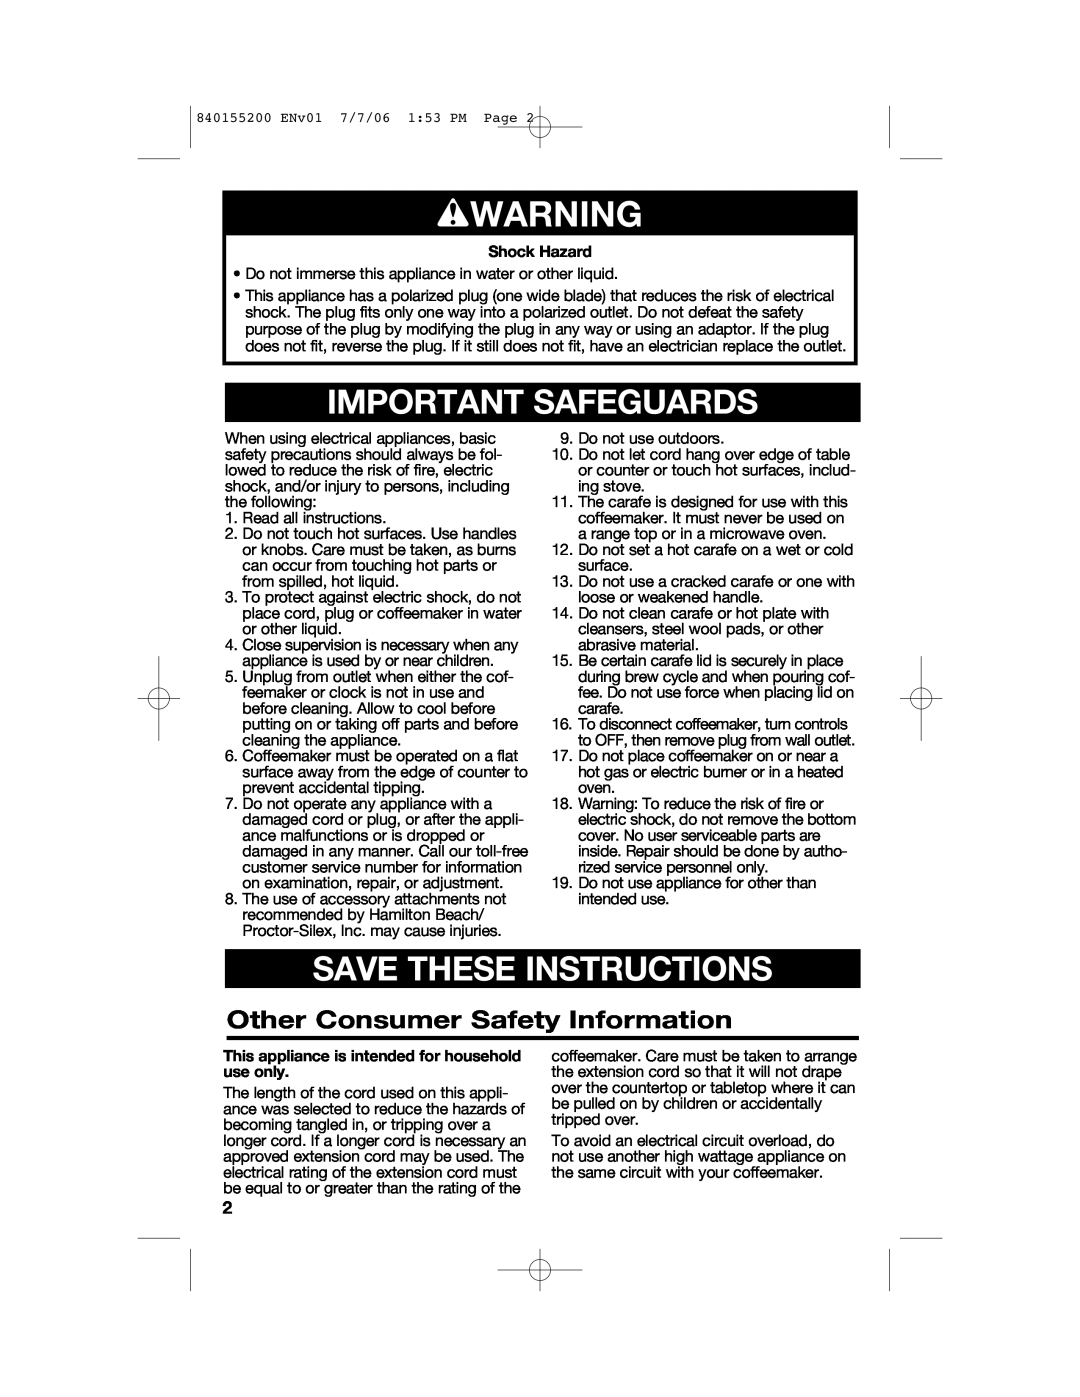 Hamilton Beach 840155200, 42884 wWARNING, Important Safeguards, Save These Instructions, Other Consumer Safety Information 